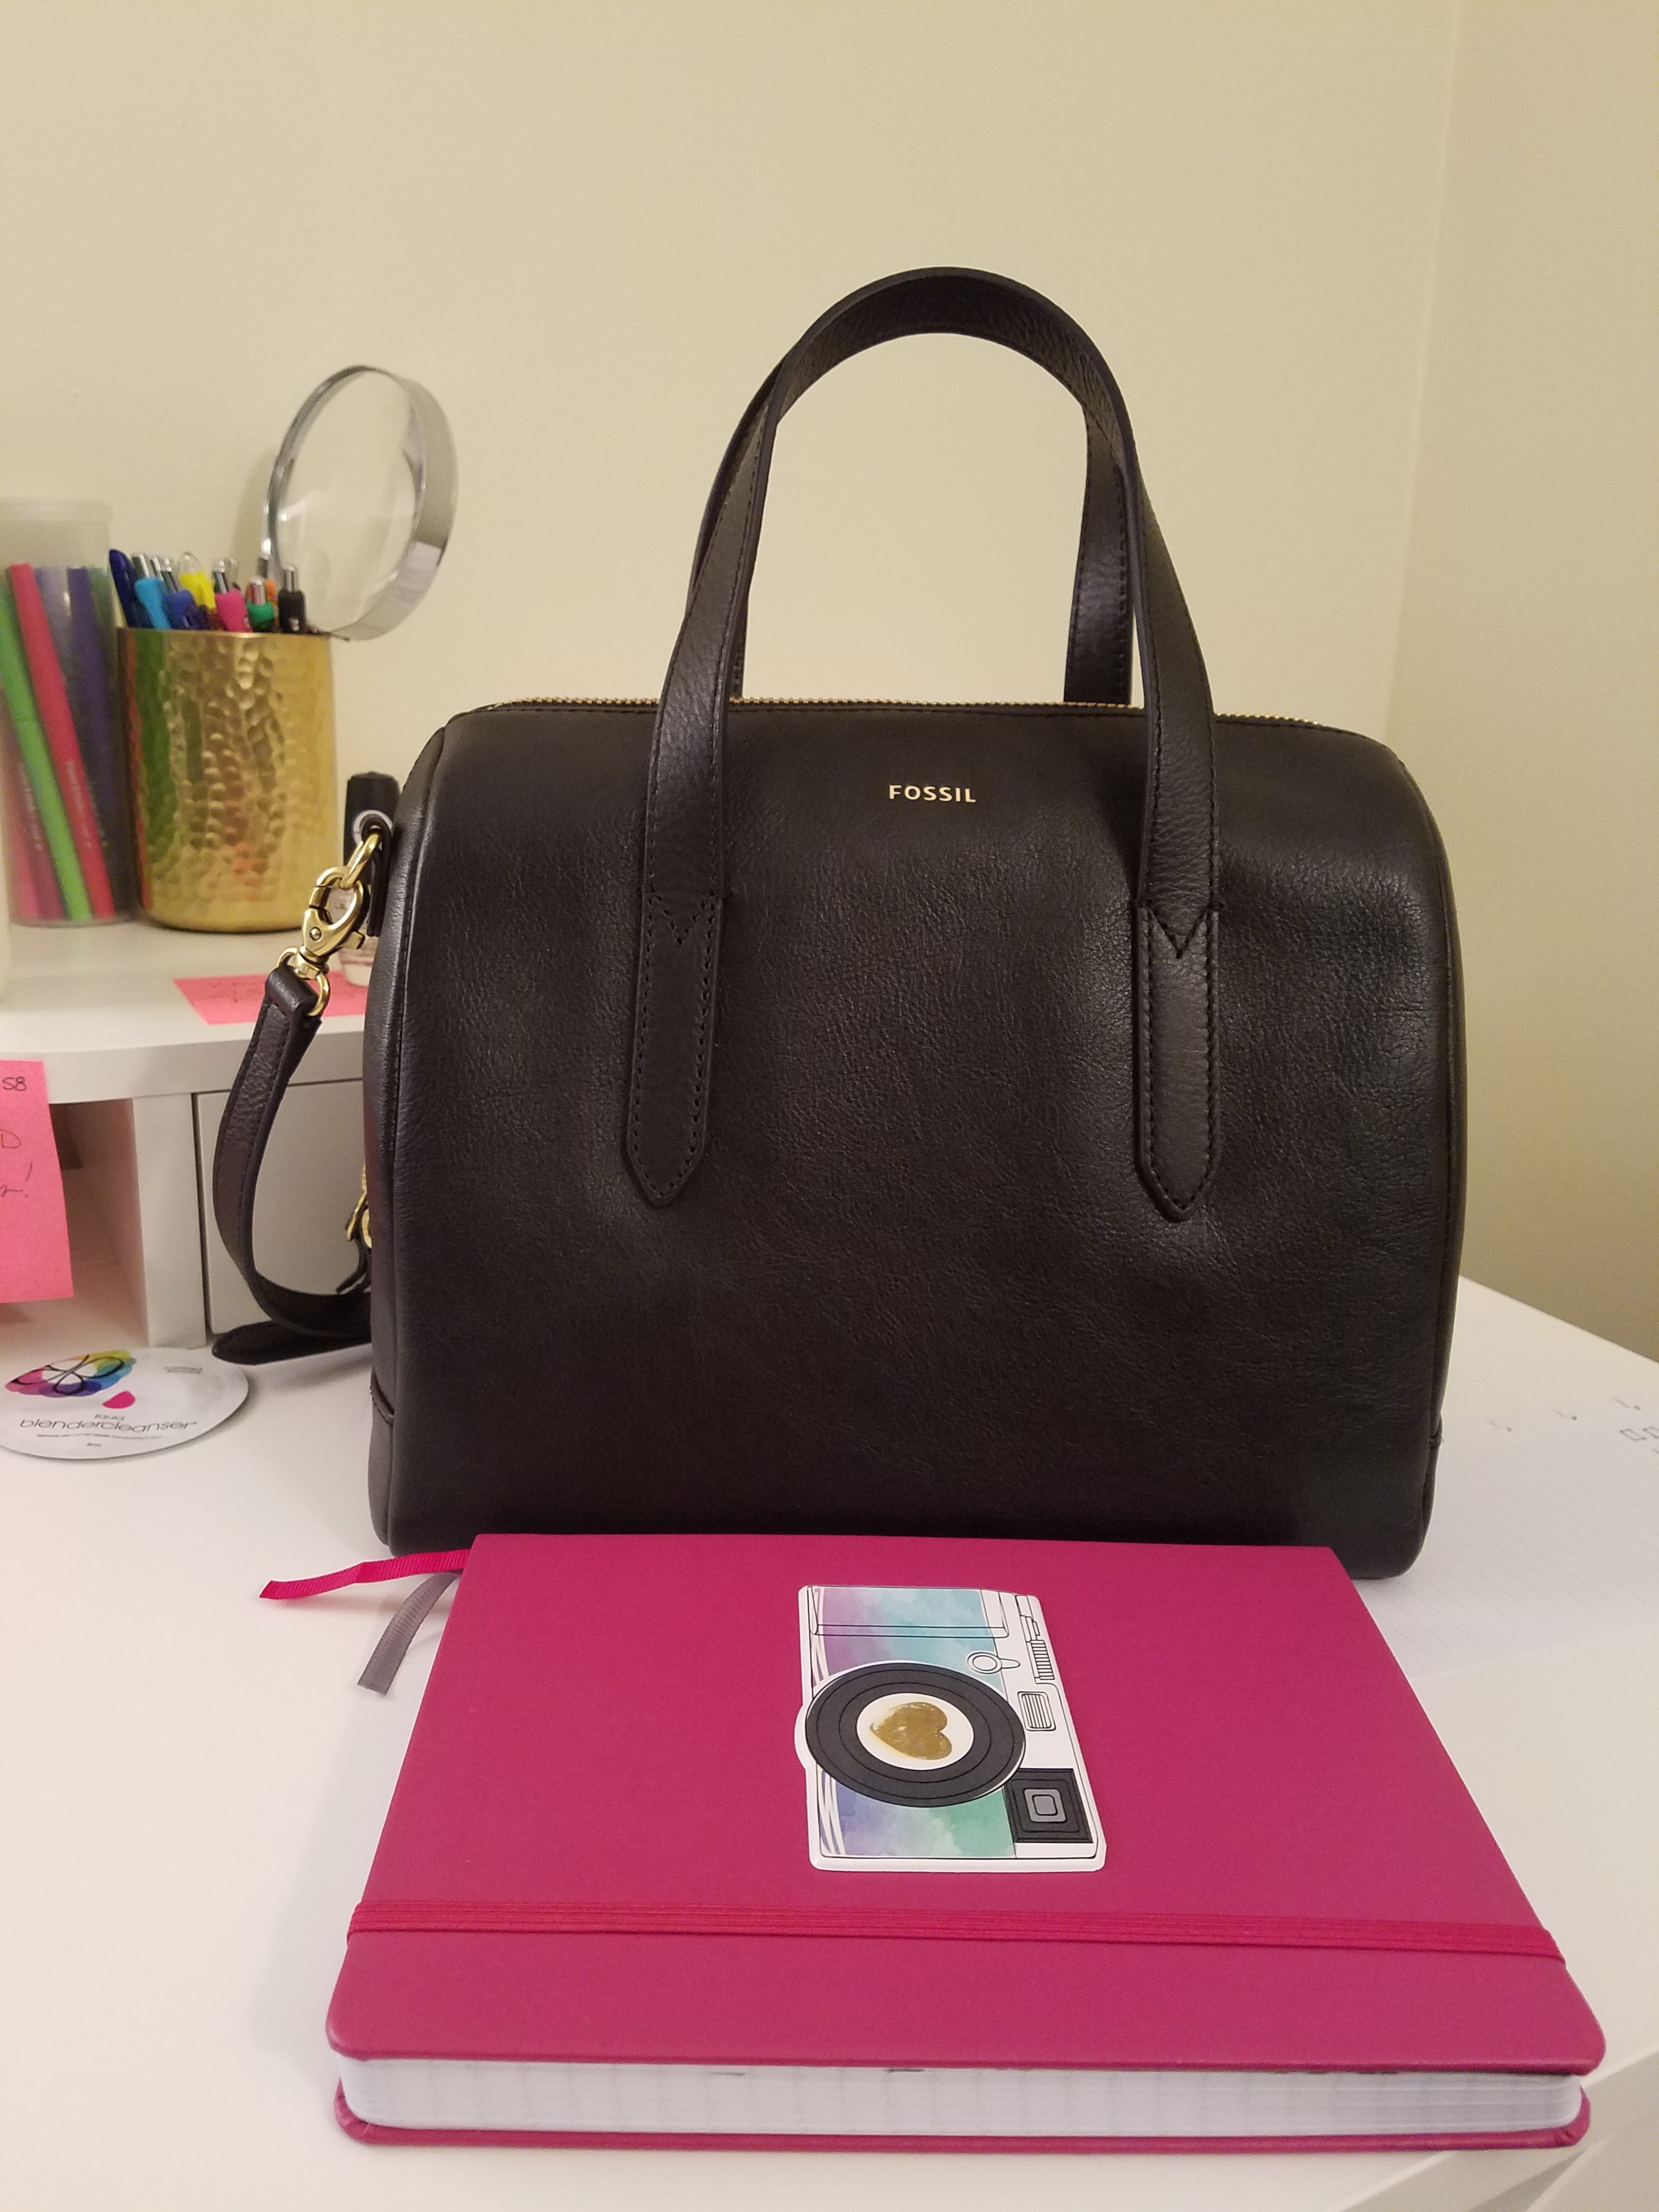 I Finally Bought It… My Fossil Sydney Satchel Review – Learning Beautiful